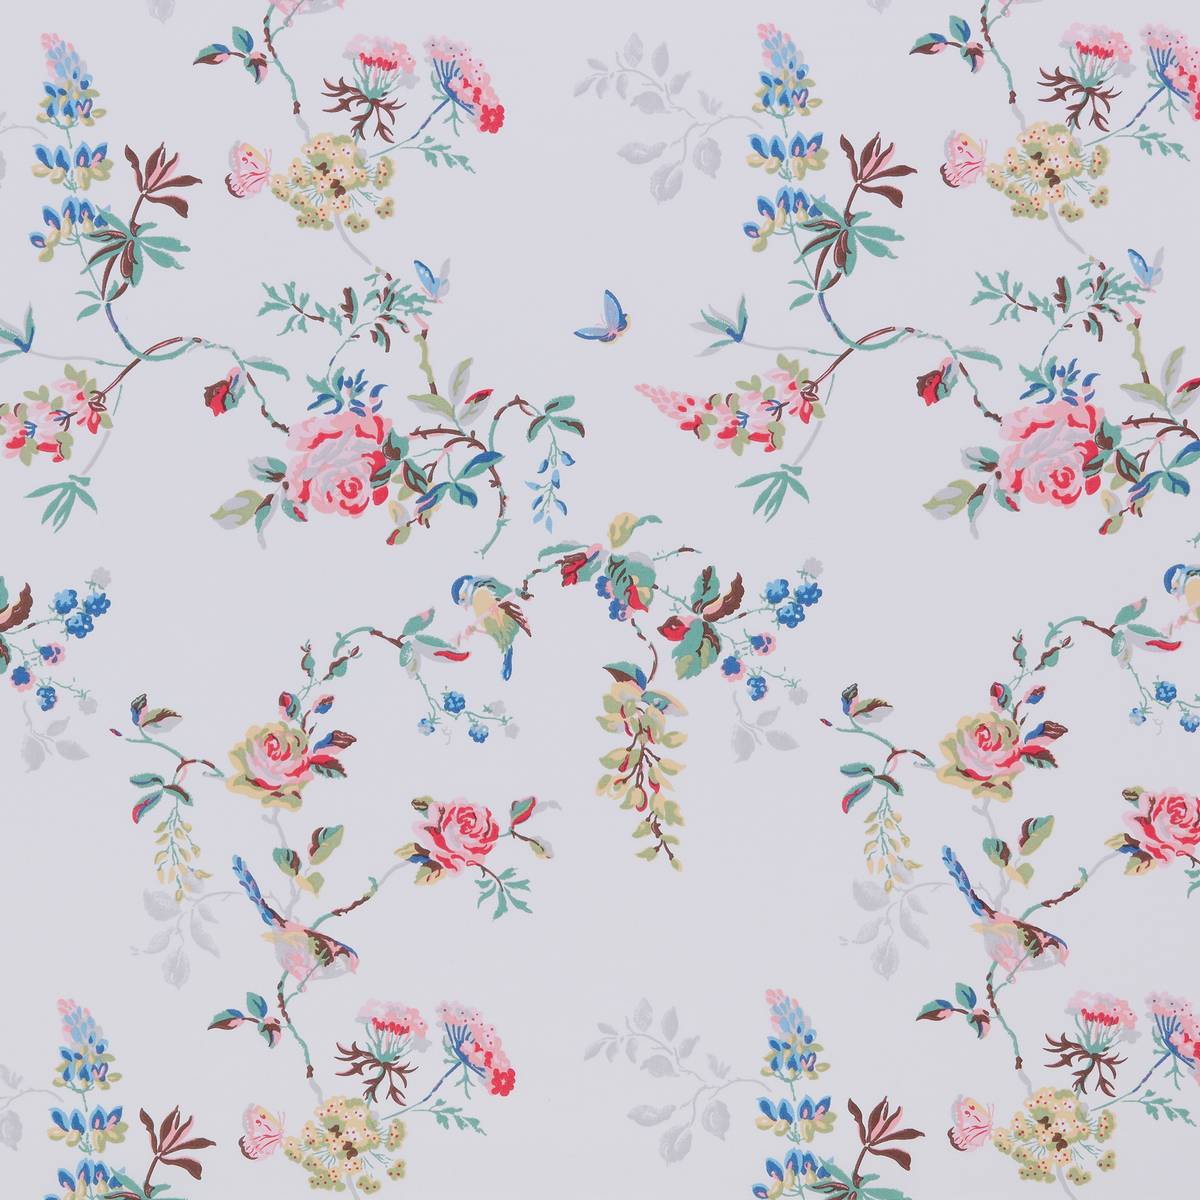 Birds & Roses Multi Fabric by Cath Kidston